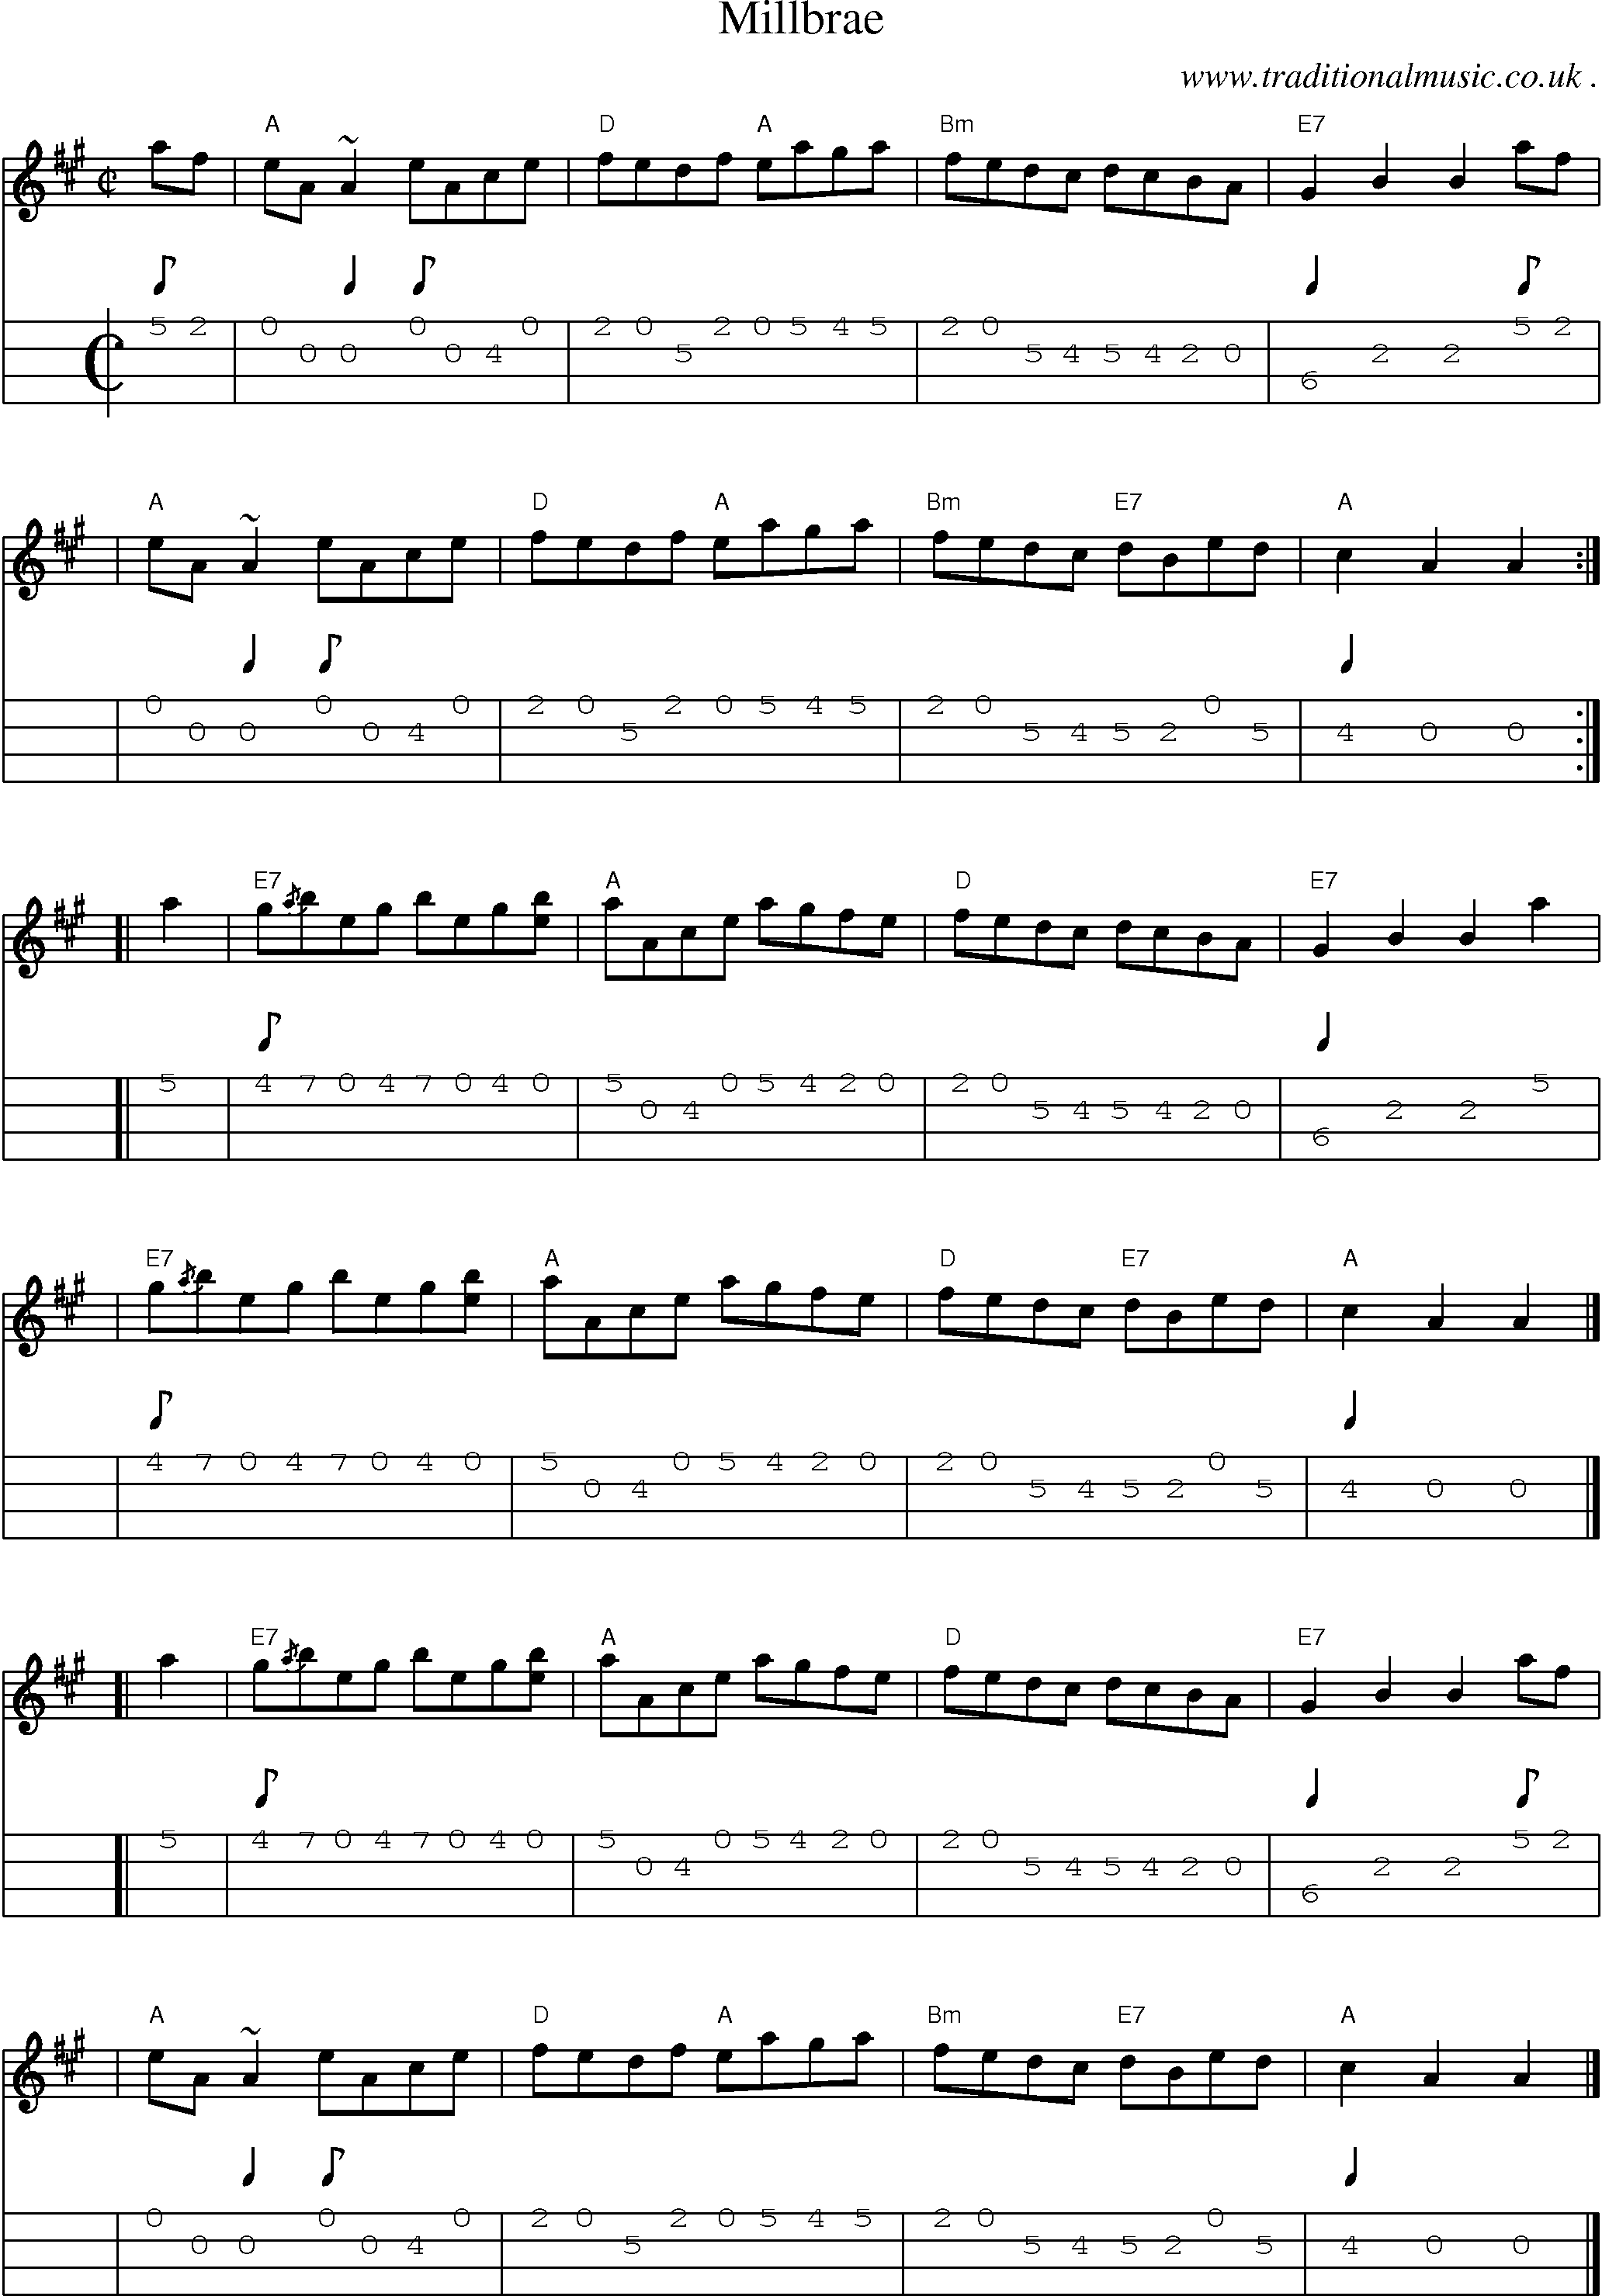 Sheet-music  score, Chords and Mandolin Tabs for Millbrae